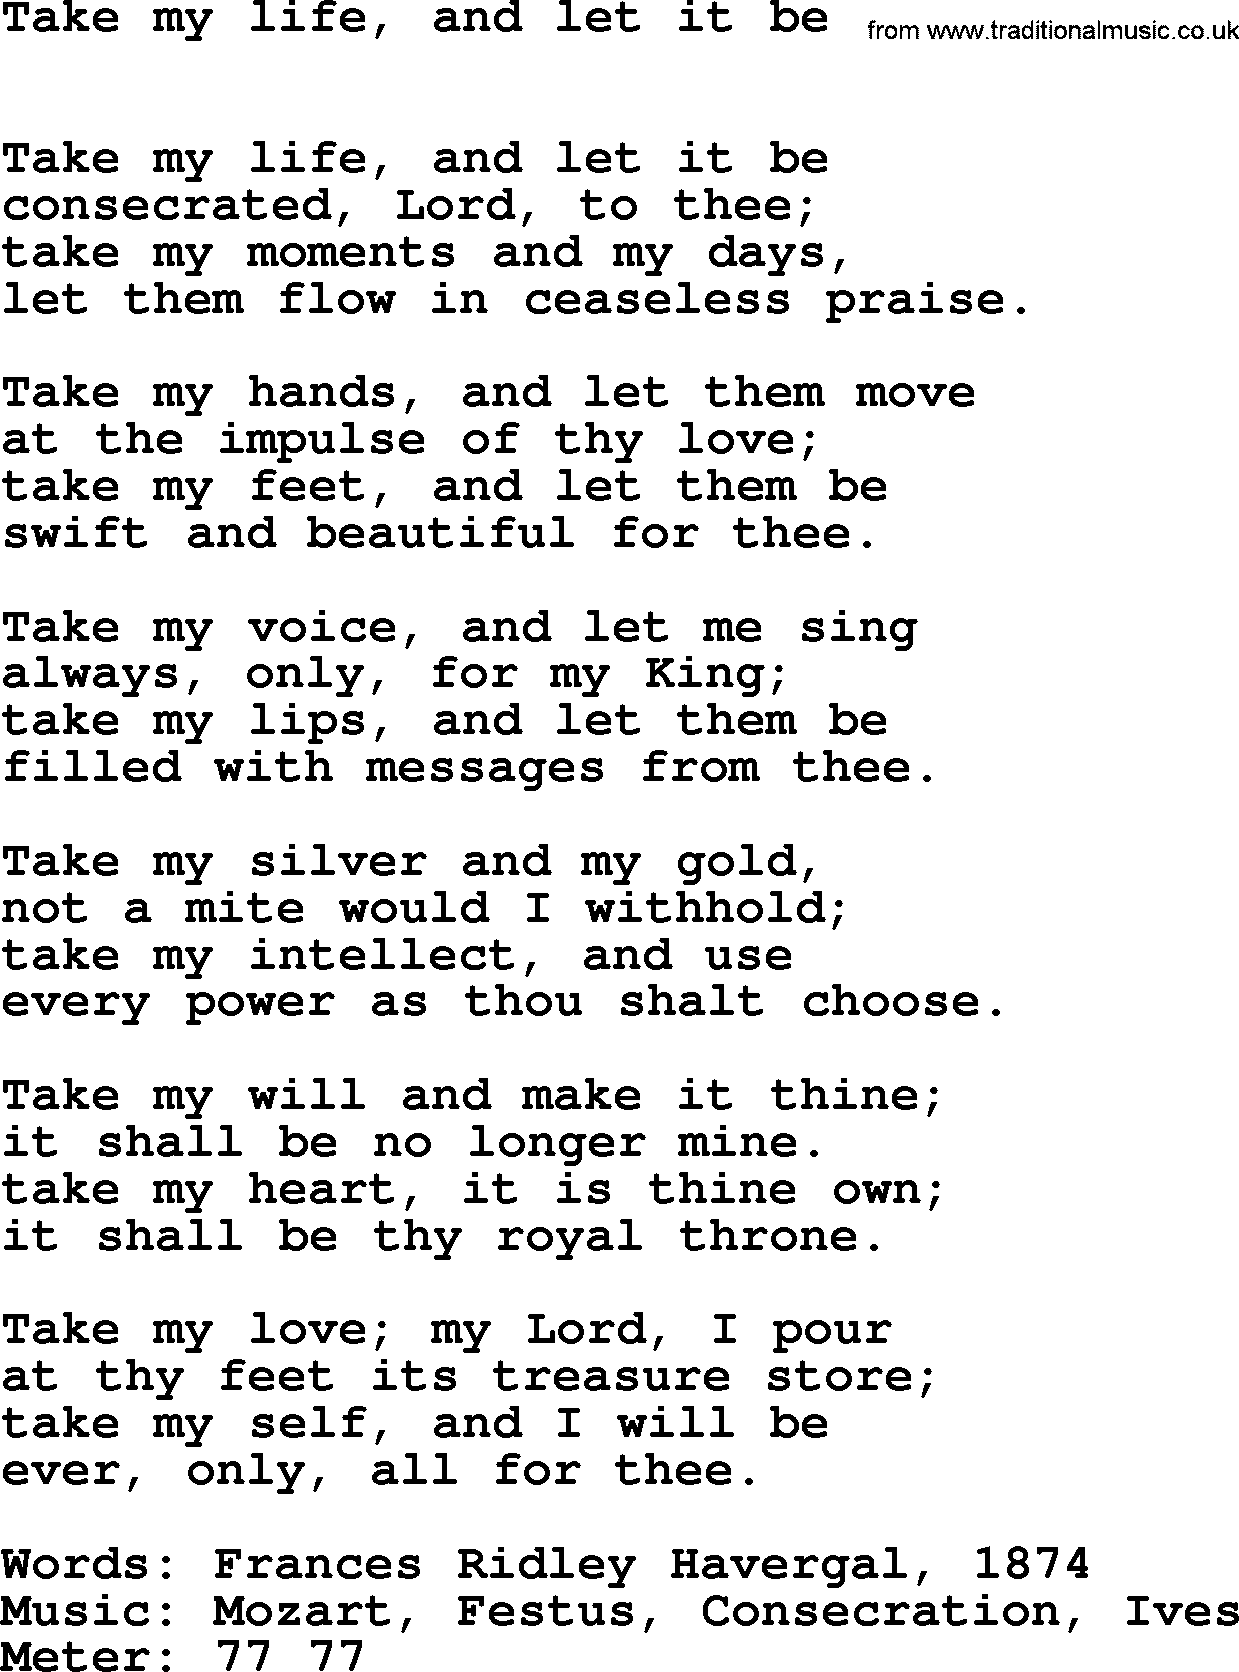 Book of Common Praise Hymn: Take My Life, And Let It Be.txt lyrics with midi music